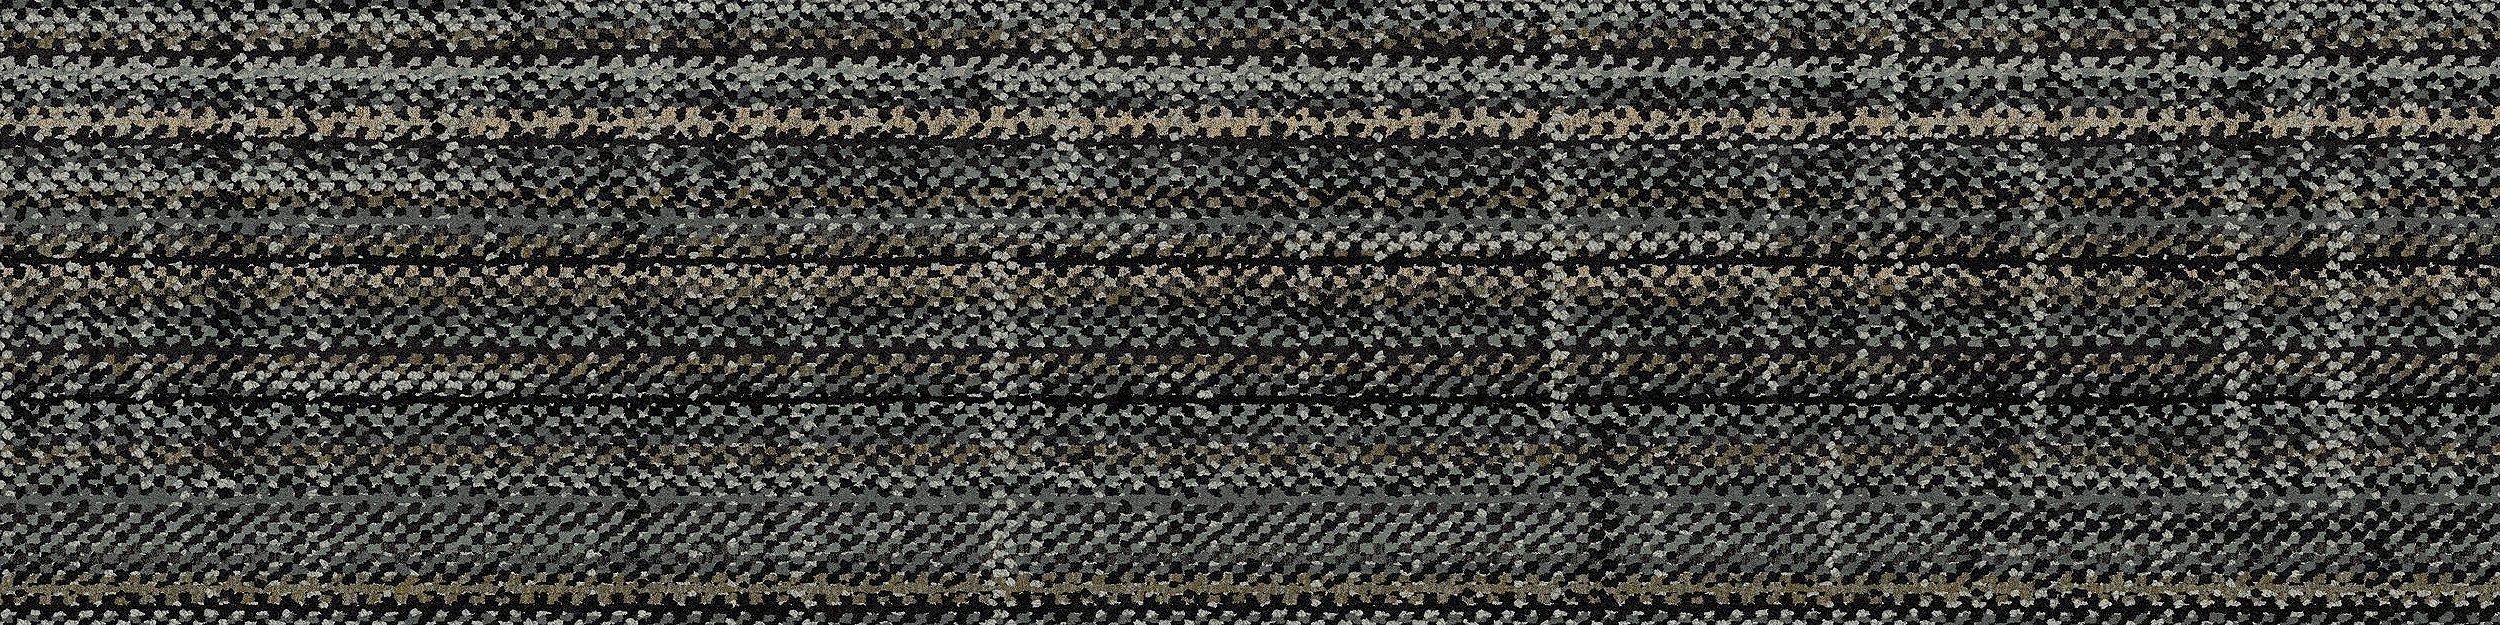 French Seams Carpet Tile In Toulouse image number 6